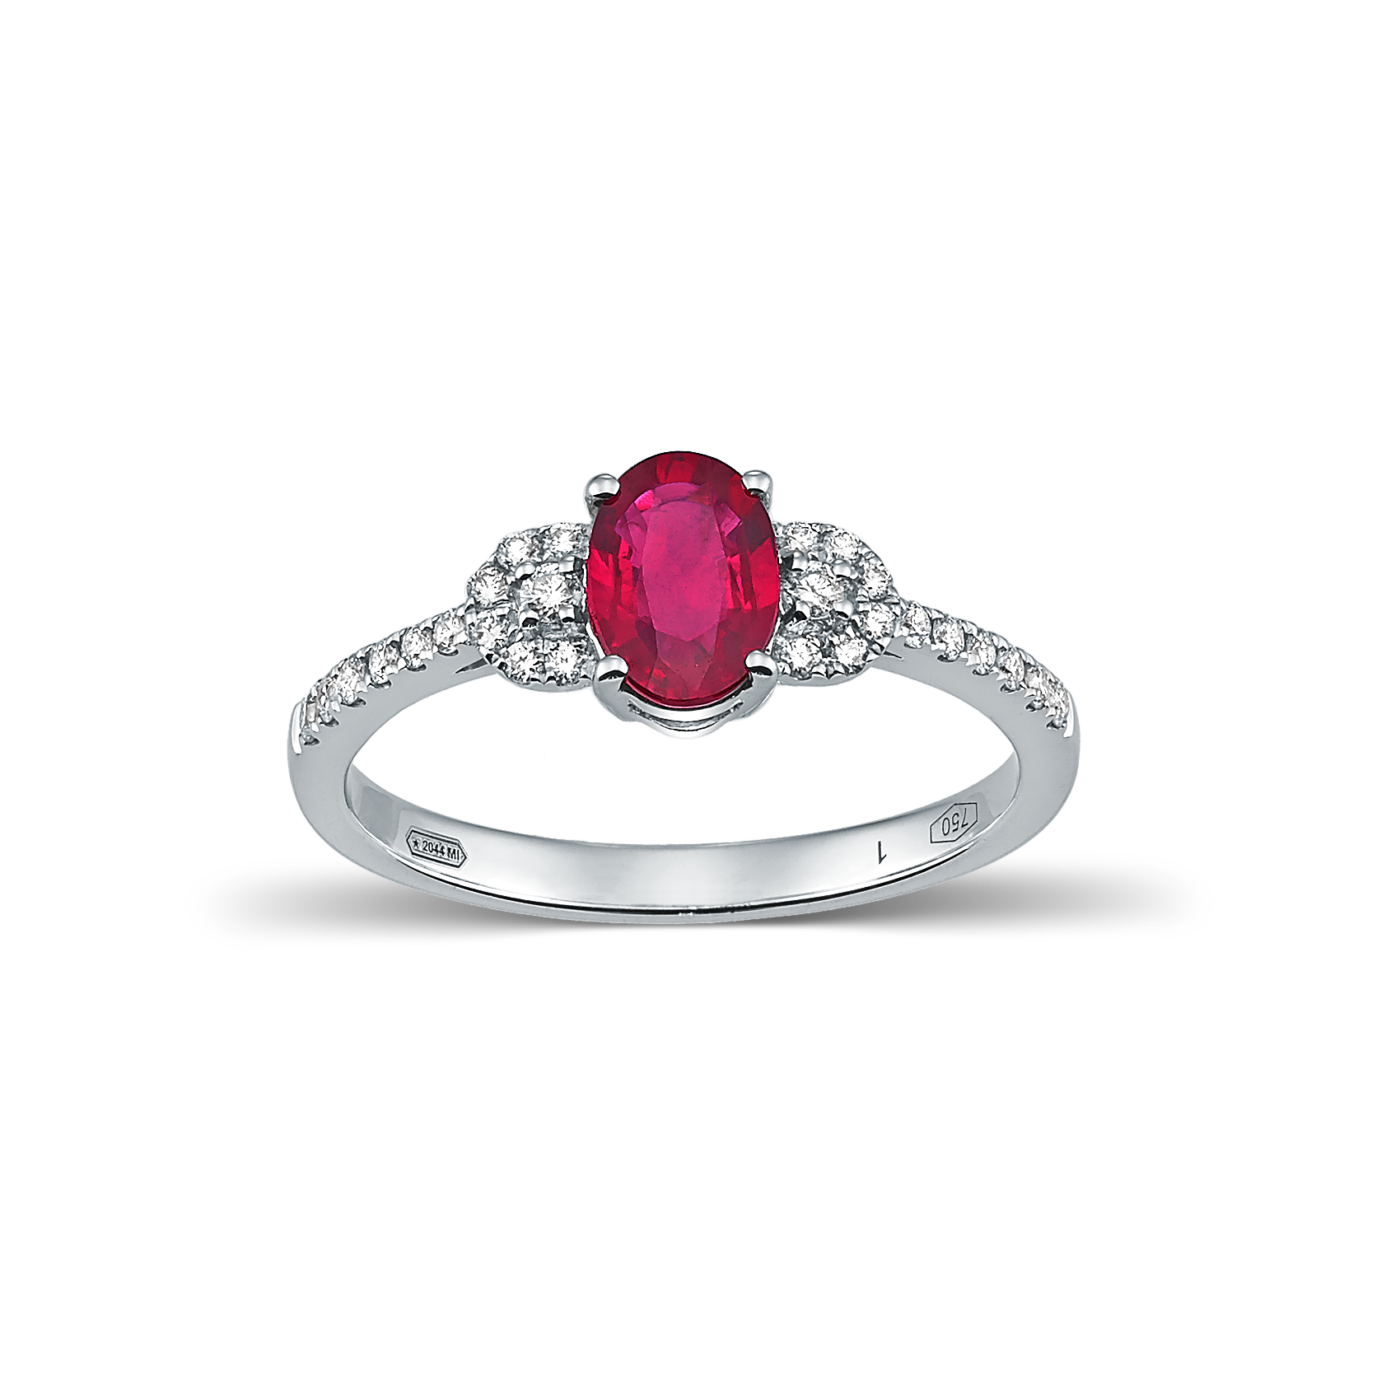 Devous Ruby Ring with Diamonds